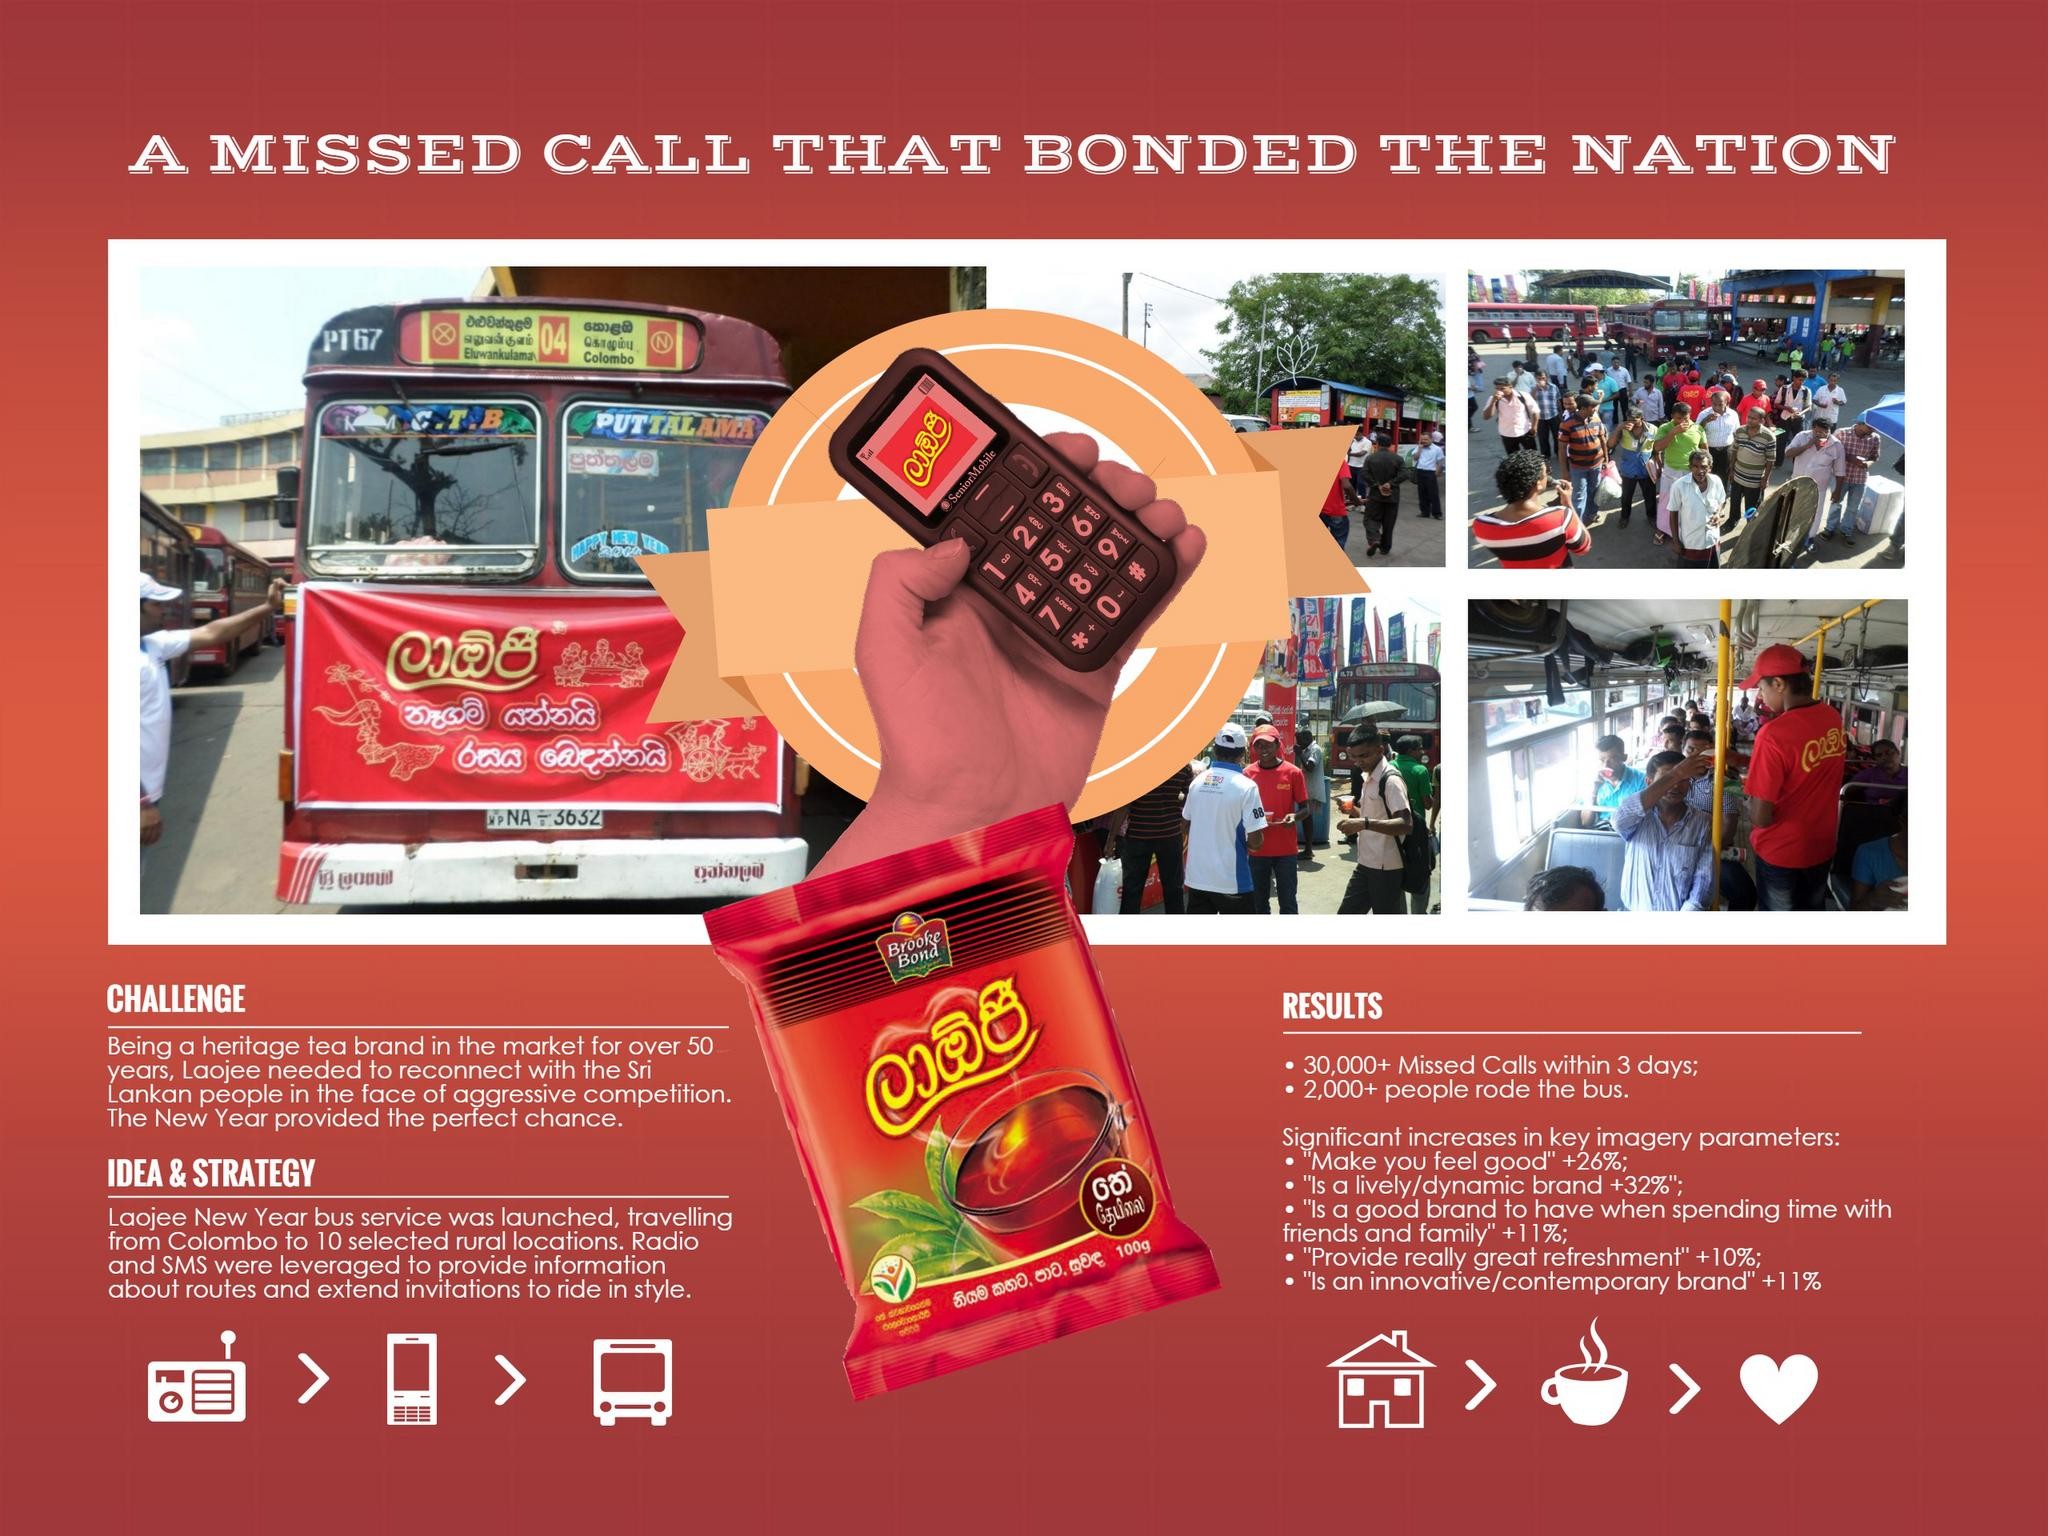 A MISSED CALL THAT BONDED THE NATION